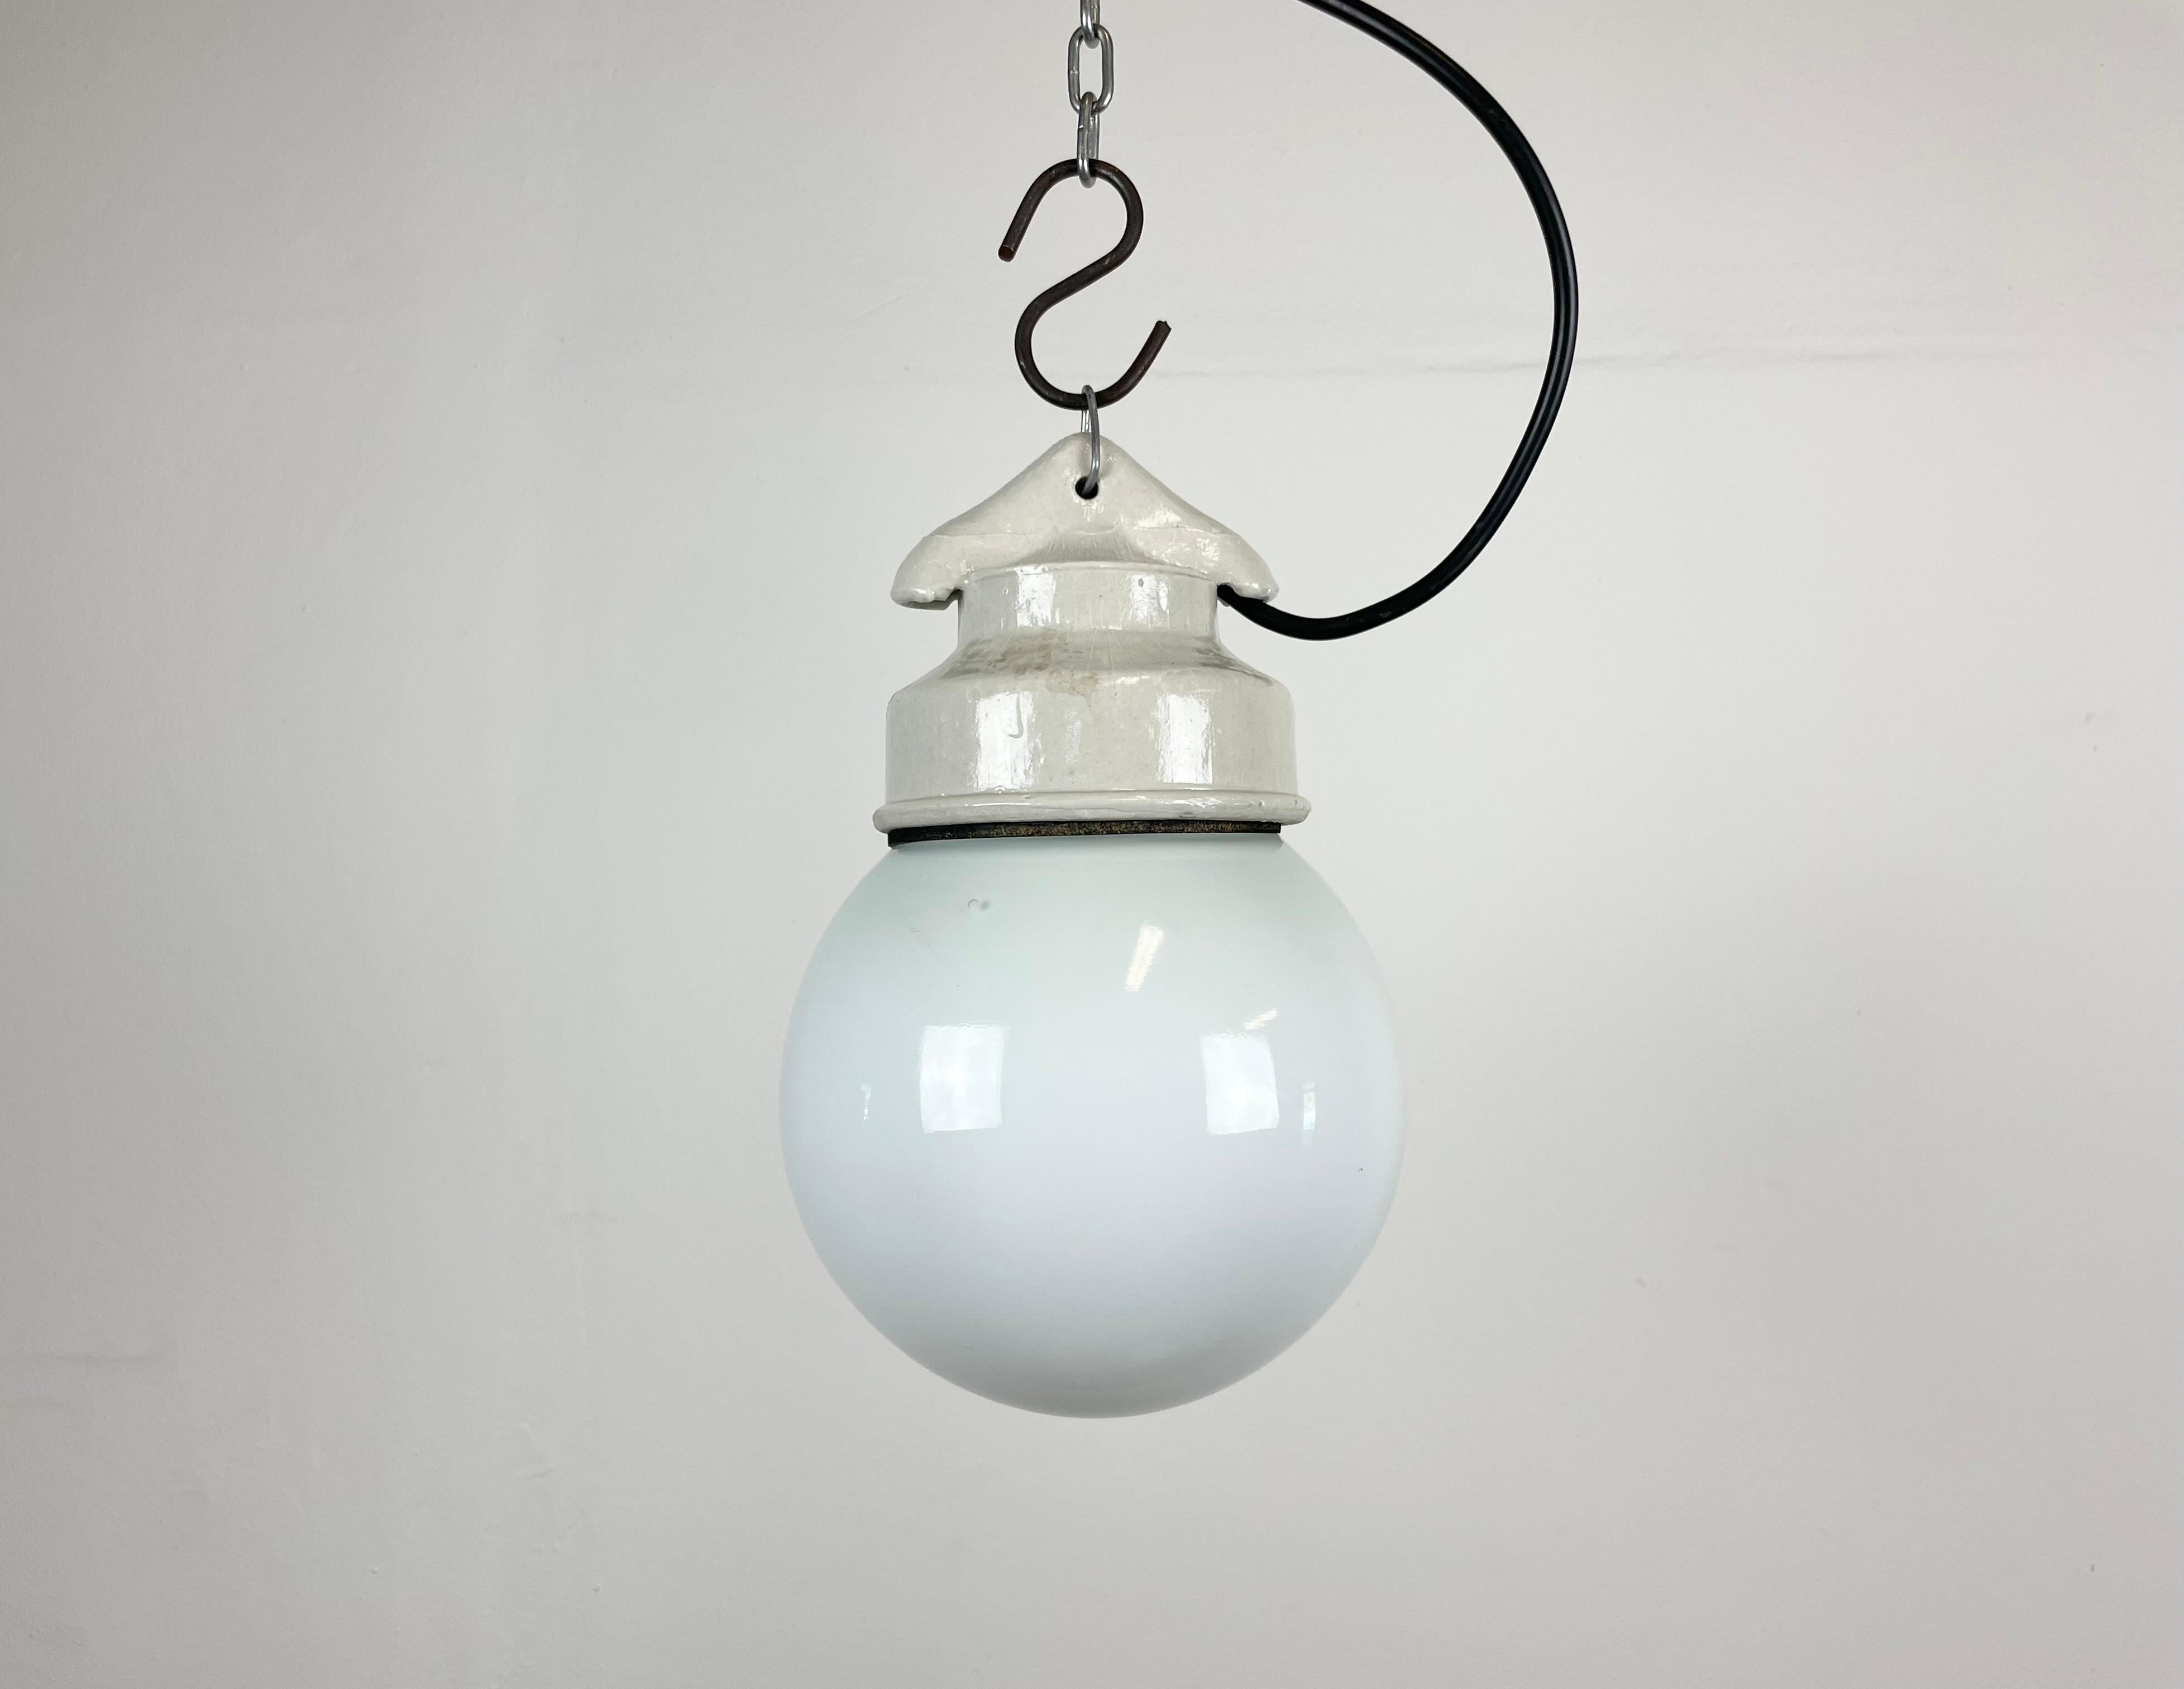 Vintage industrial light made in former Soviet Union during the 1970s.It features a white porcelain top and a milk glass cover. The socket requires E27 light bulbs. New wire. The weight of the lamp is 1kg.